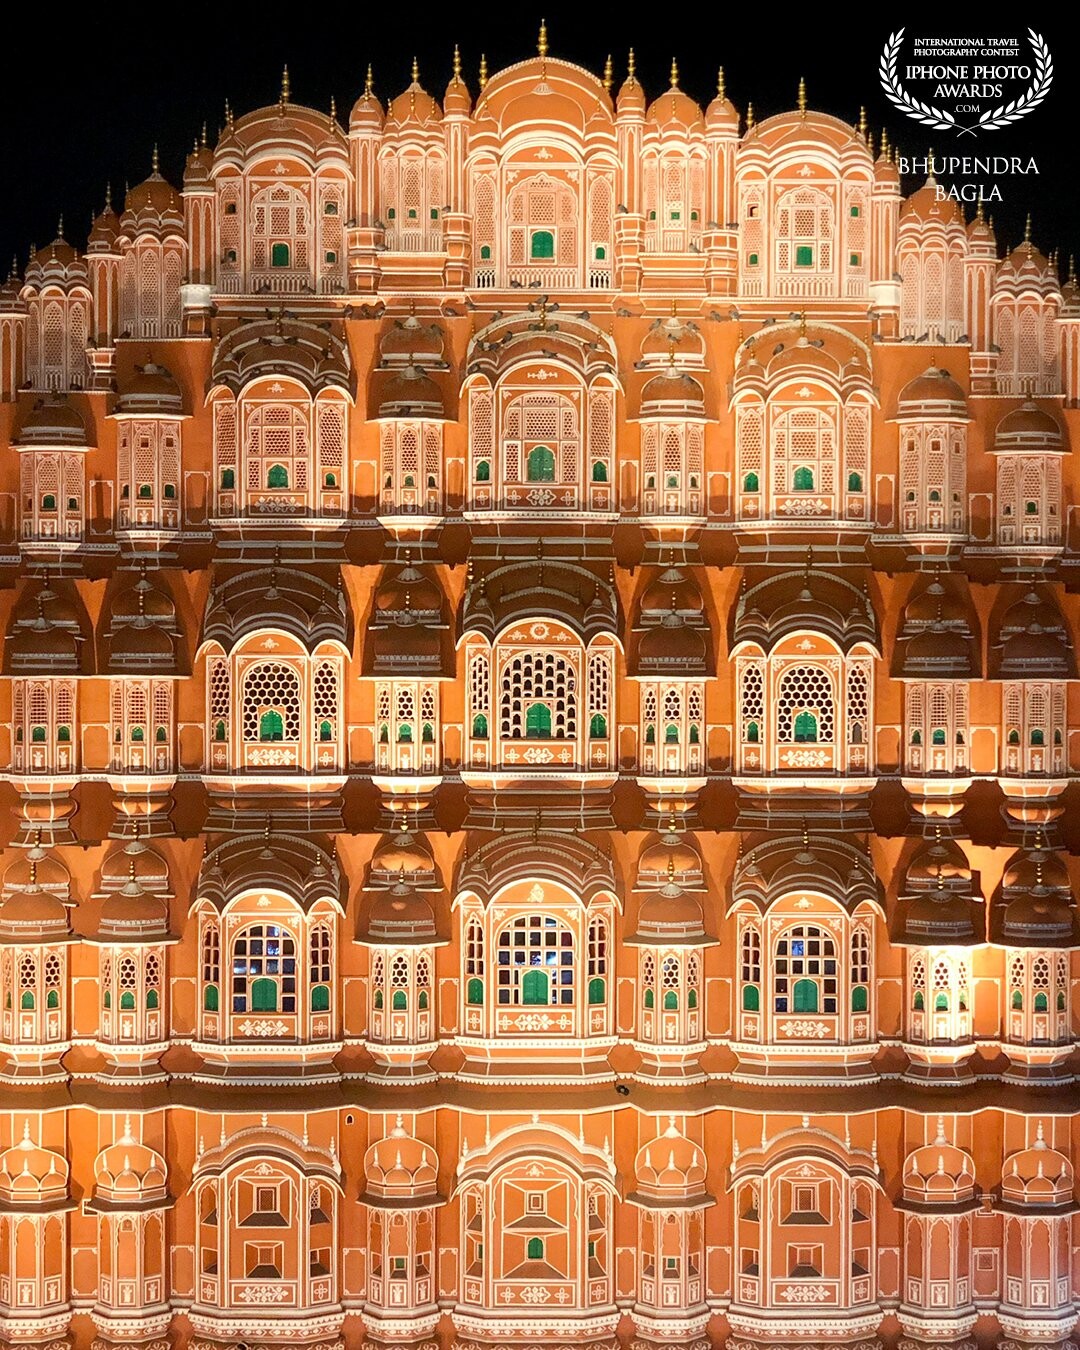 This was taken from a rooftop opposite the “Hawa Mahal” also known as the “Palace of Winds” in Jaipur. The lighting on the building made it look so magnificent and it was worth capturing. Night photography always compliments the subject and my iPhone made a perfect wallpaper for my screen.